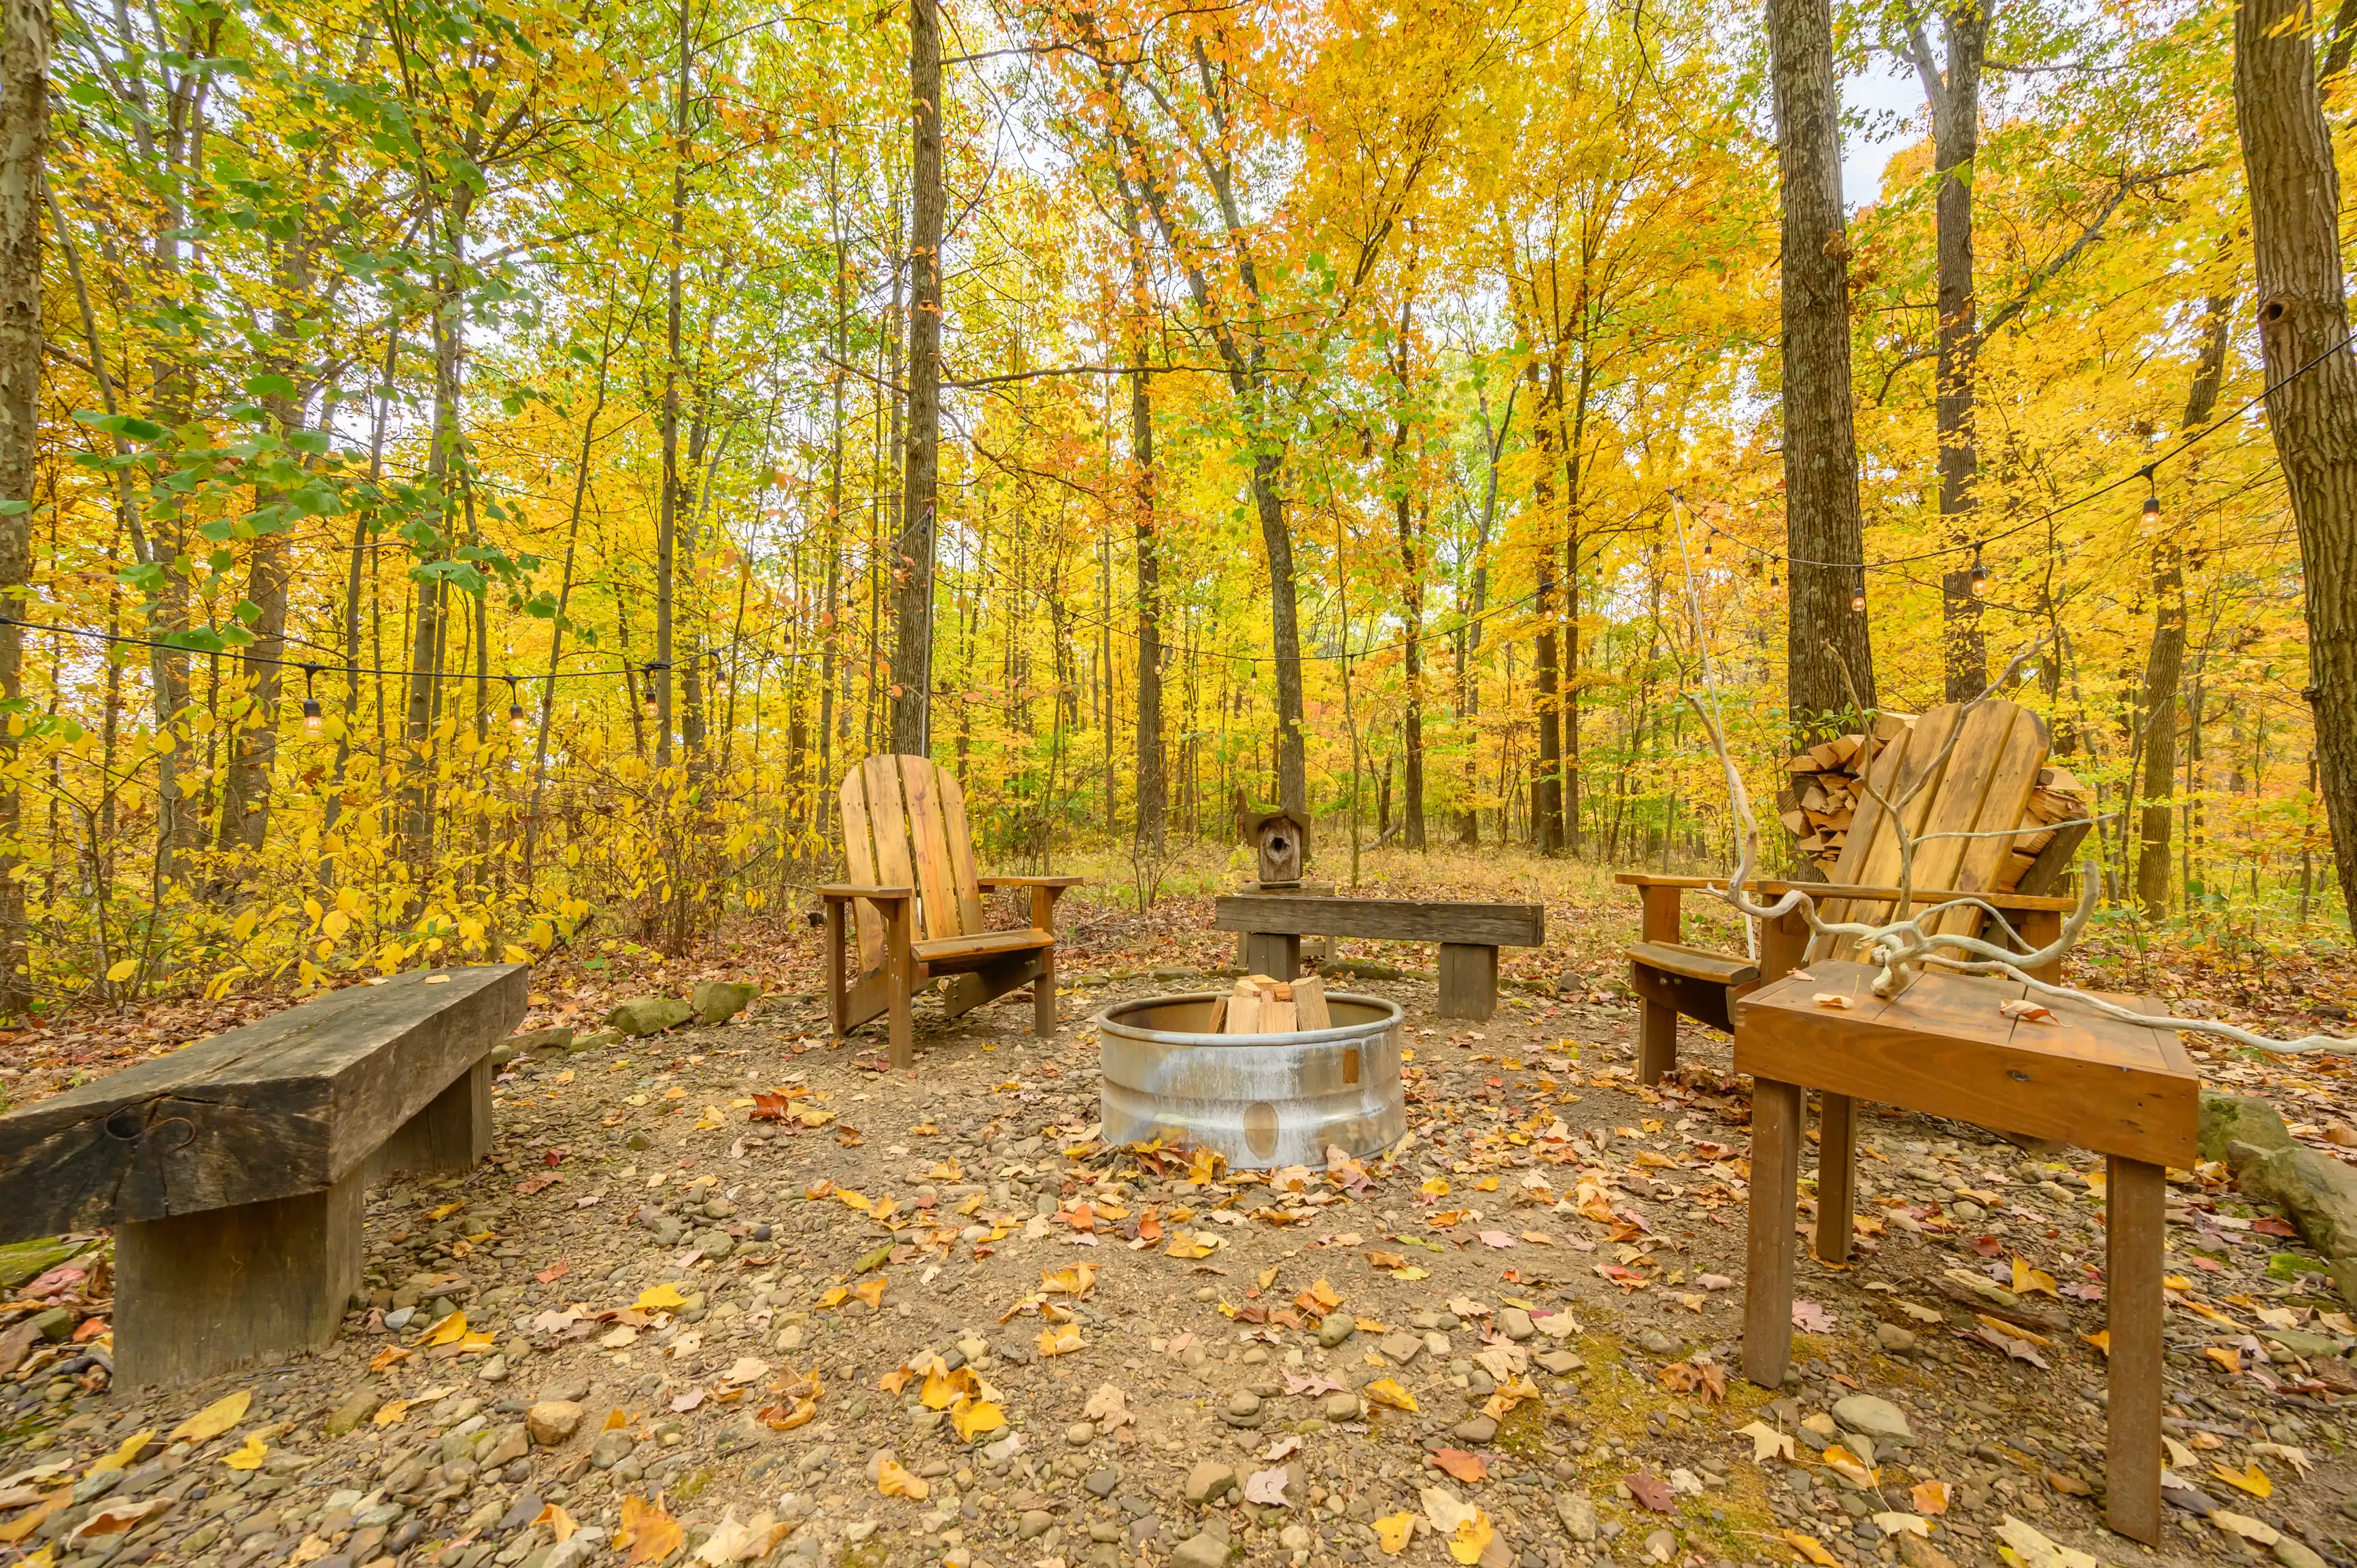 A cozy autumnal outdoor setting with Adirondack chairs around a fire pit in a forest with fall foliage.